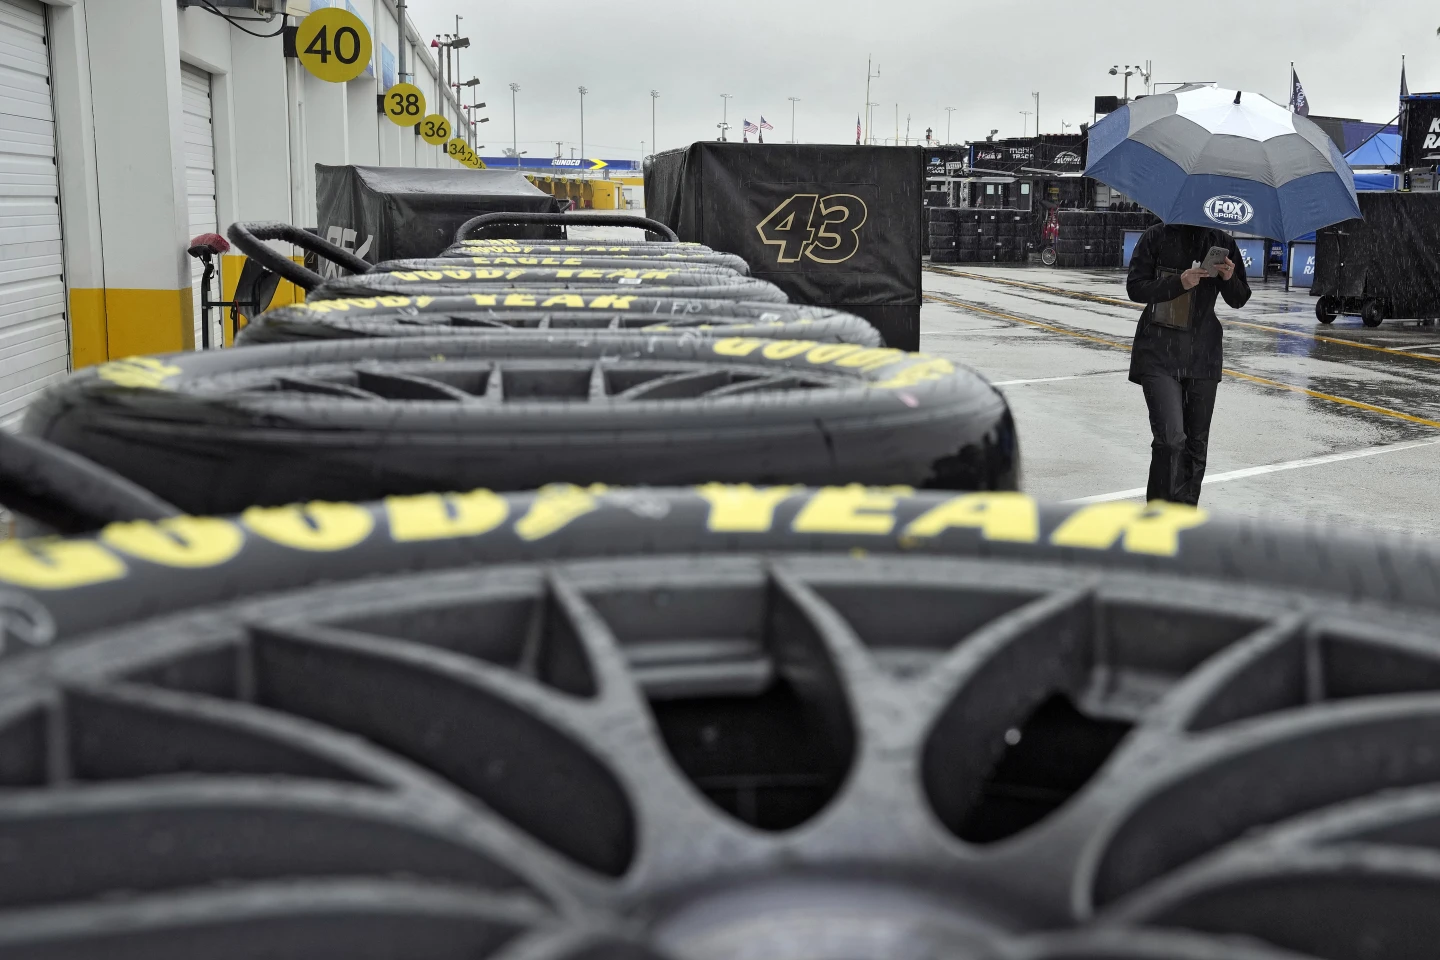 Listen to Daytona 500 on WIZM Monday, after first rain delay since 2012